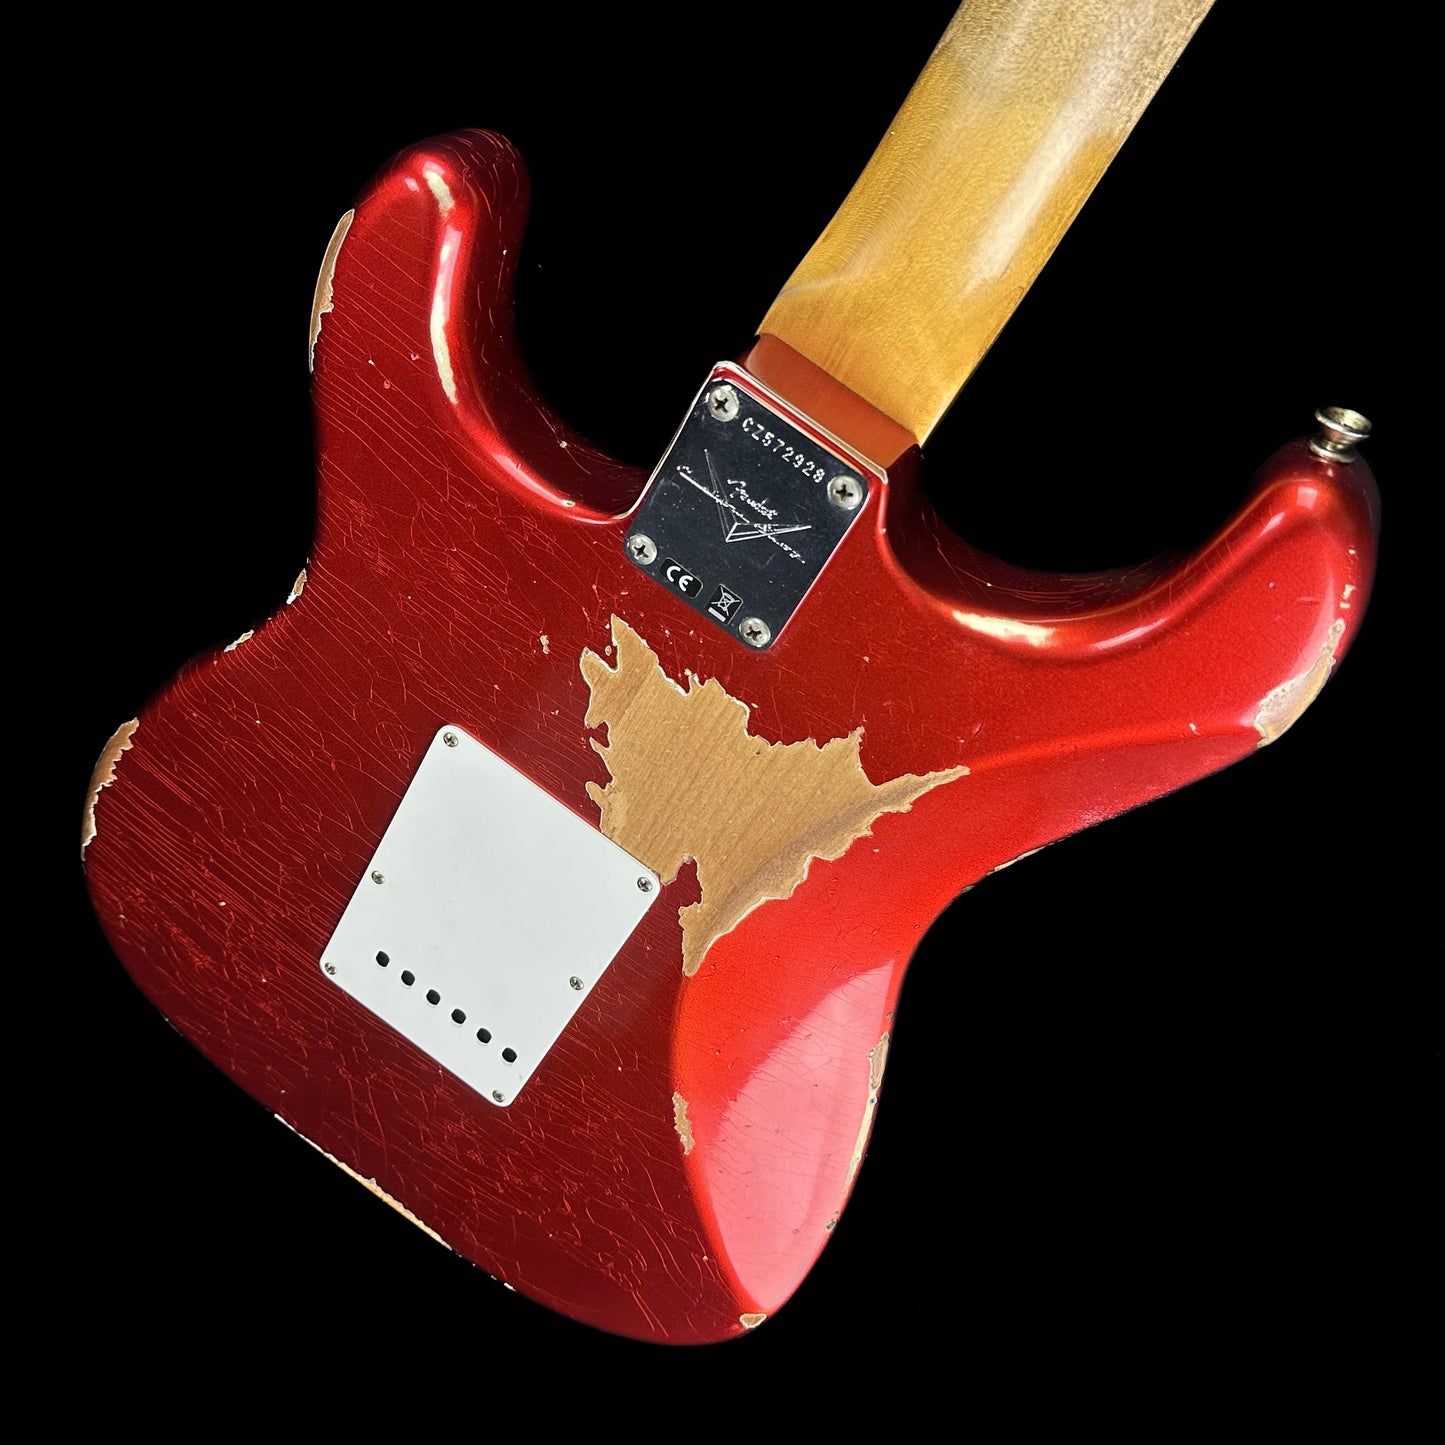 Back angle of Fender Custom Shop 59 Strat Heavy Relic Super Faded Aged Candy Apple Red.